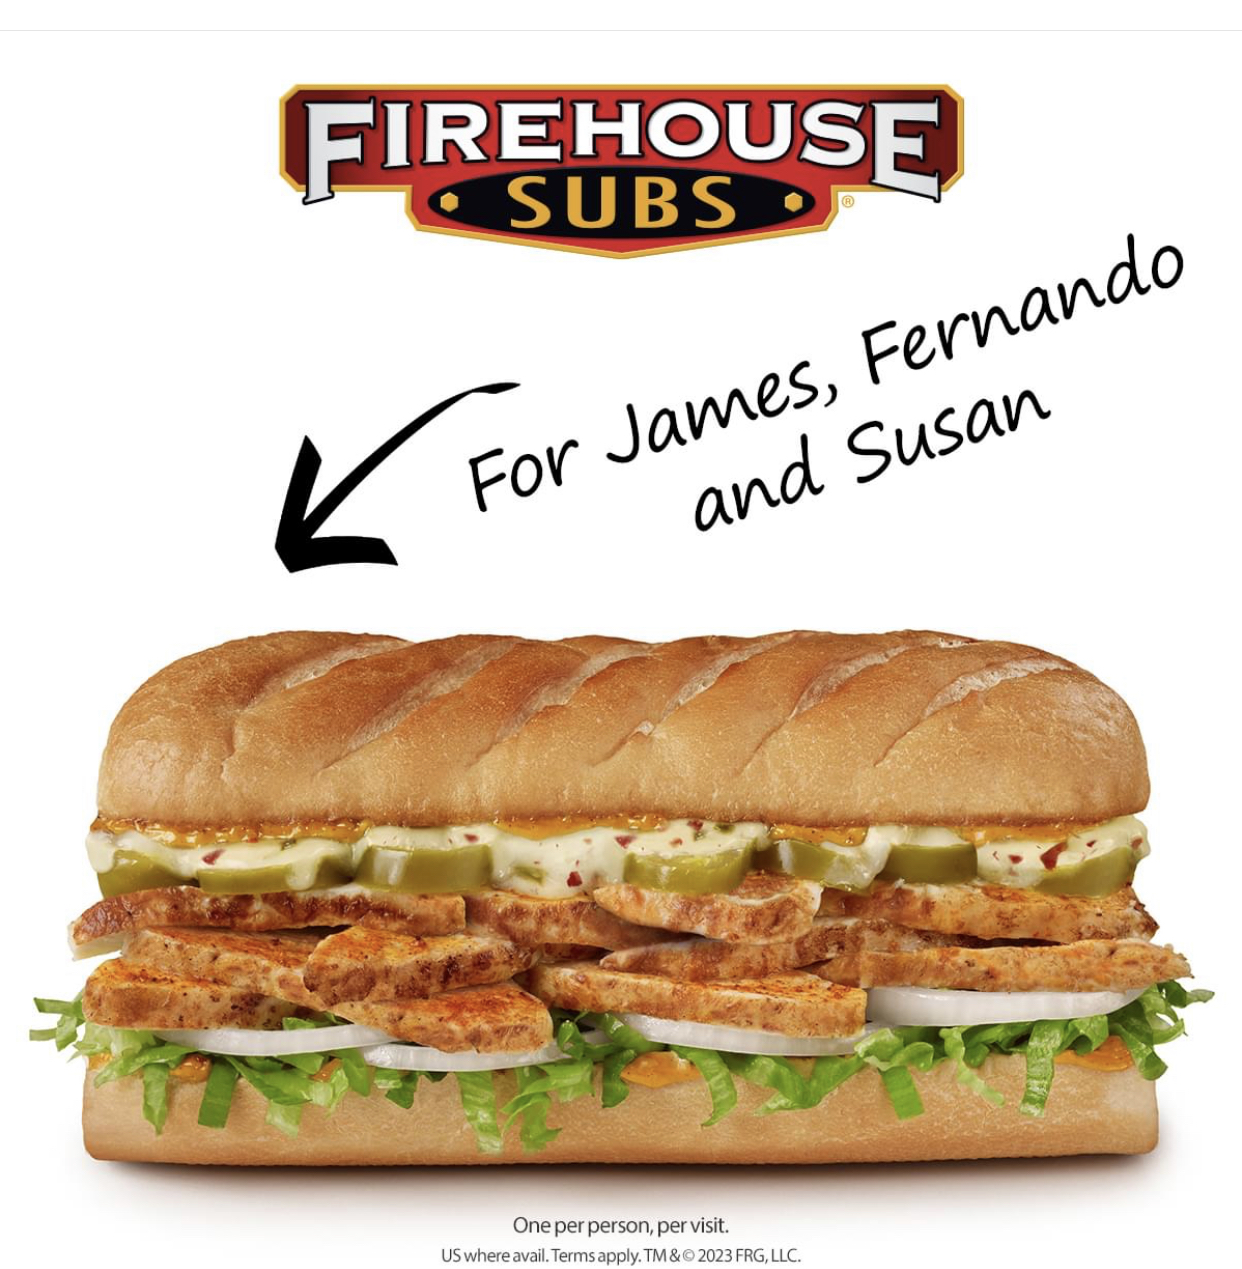 Firehouse Subs Name of the Day is BACK! Free Sub on June 14th!